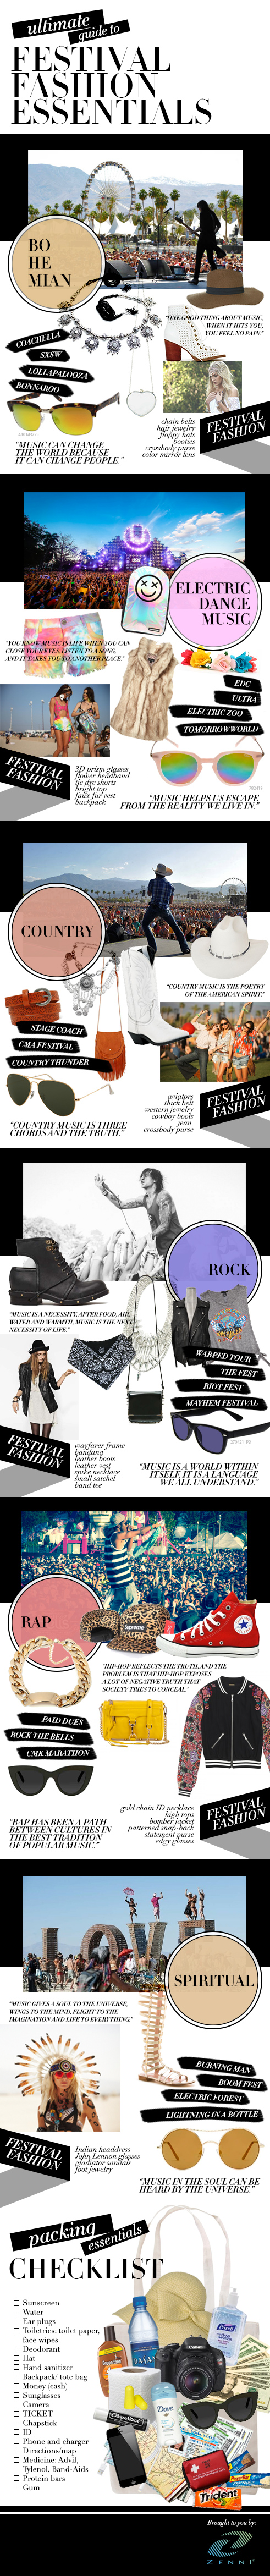 The Ultimate Guide to Music Festival Fashion Essentials